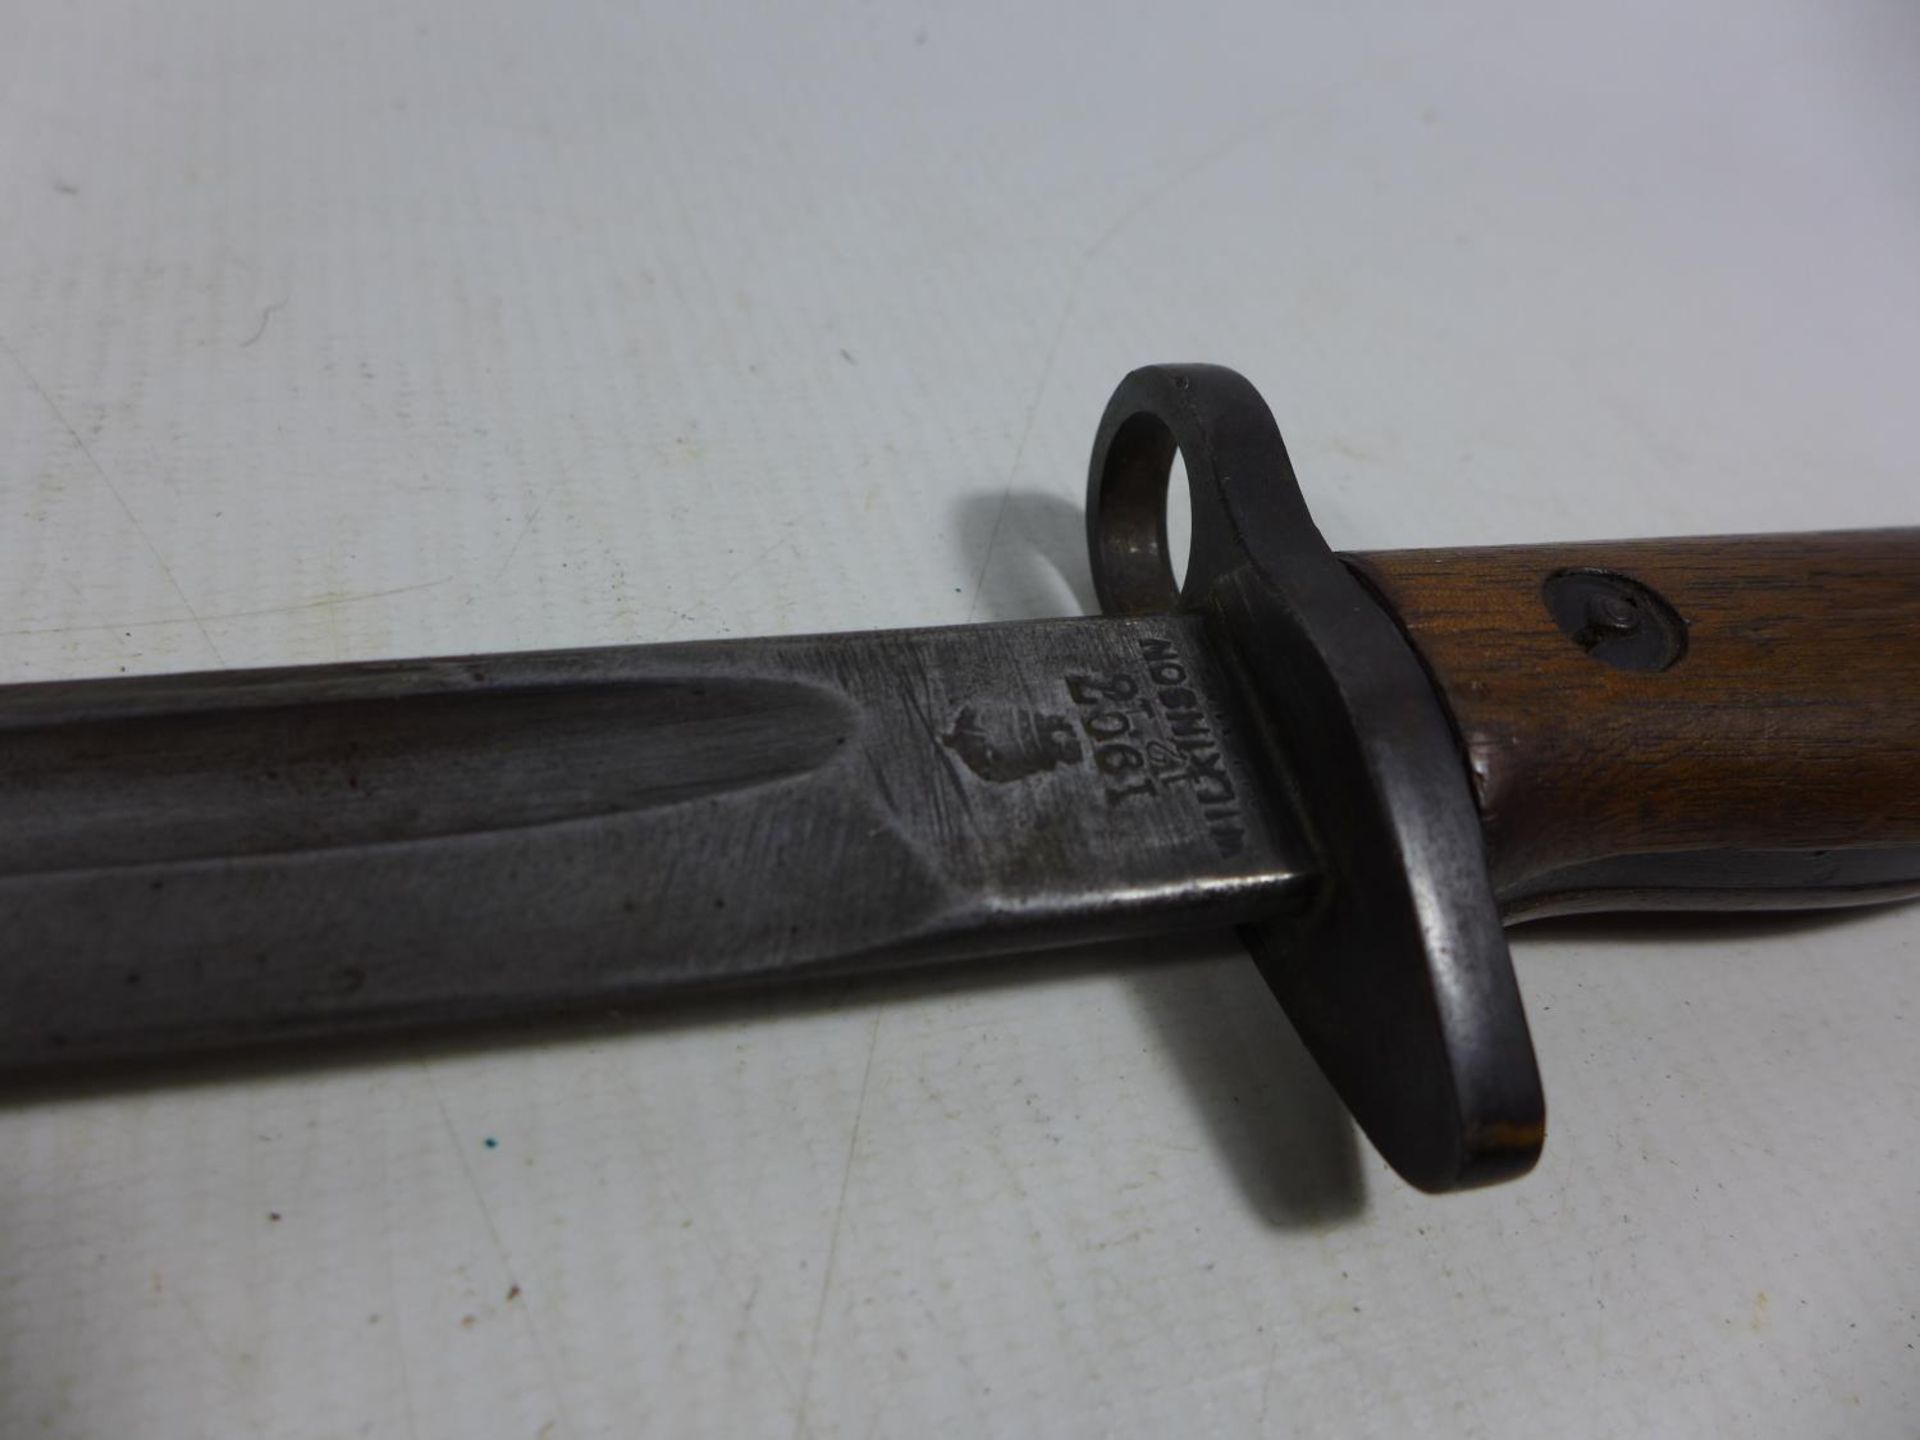 A BRITISH ARMY WORLD WAR I 1907 PATTERN BAYONET AND SCABBARD BY WILKINSON, 43CM BLADE - Image 2 of 7